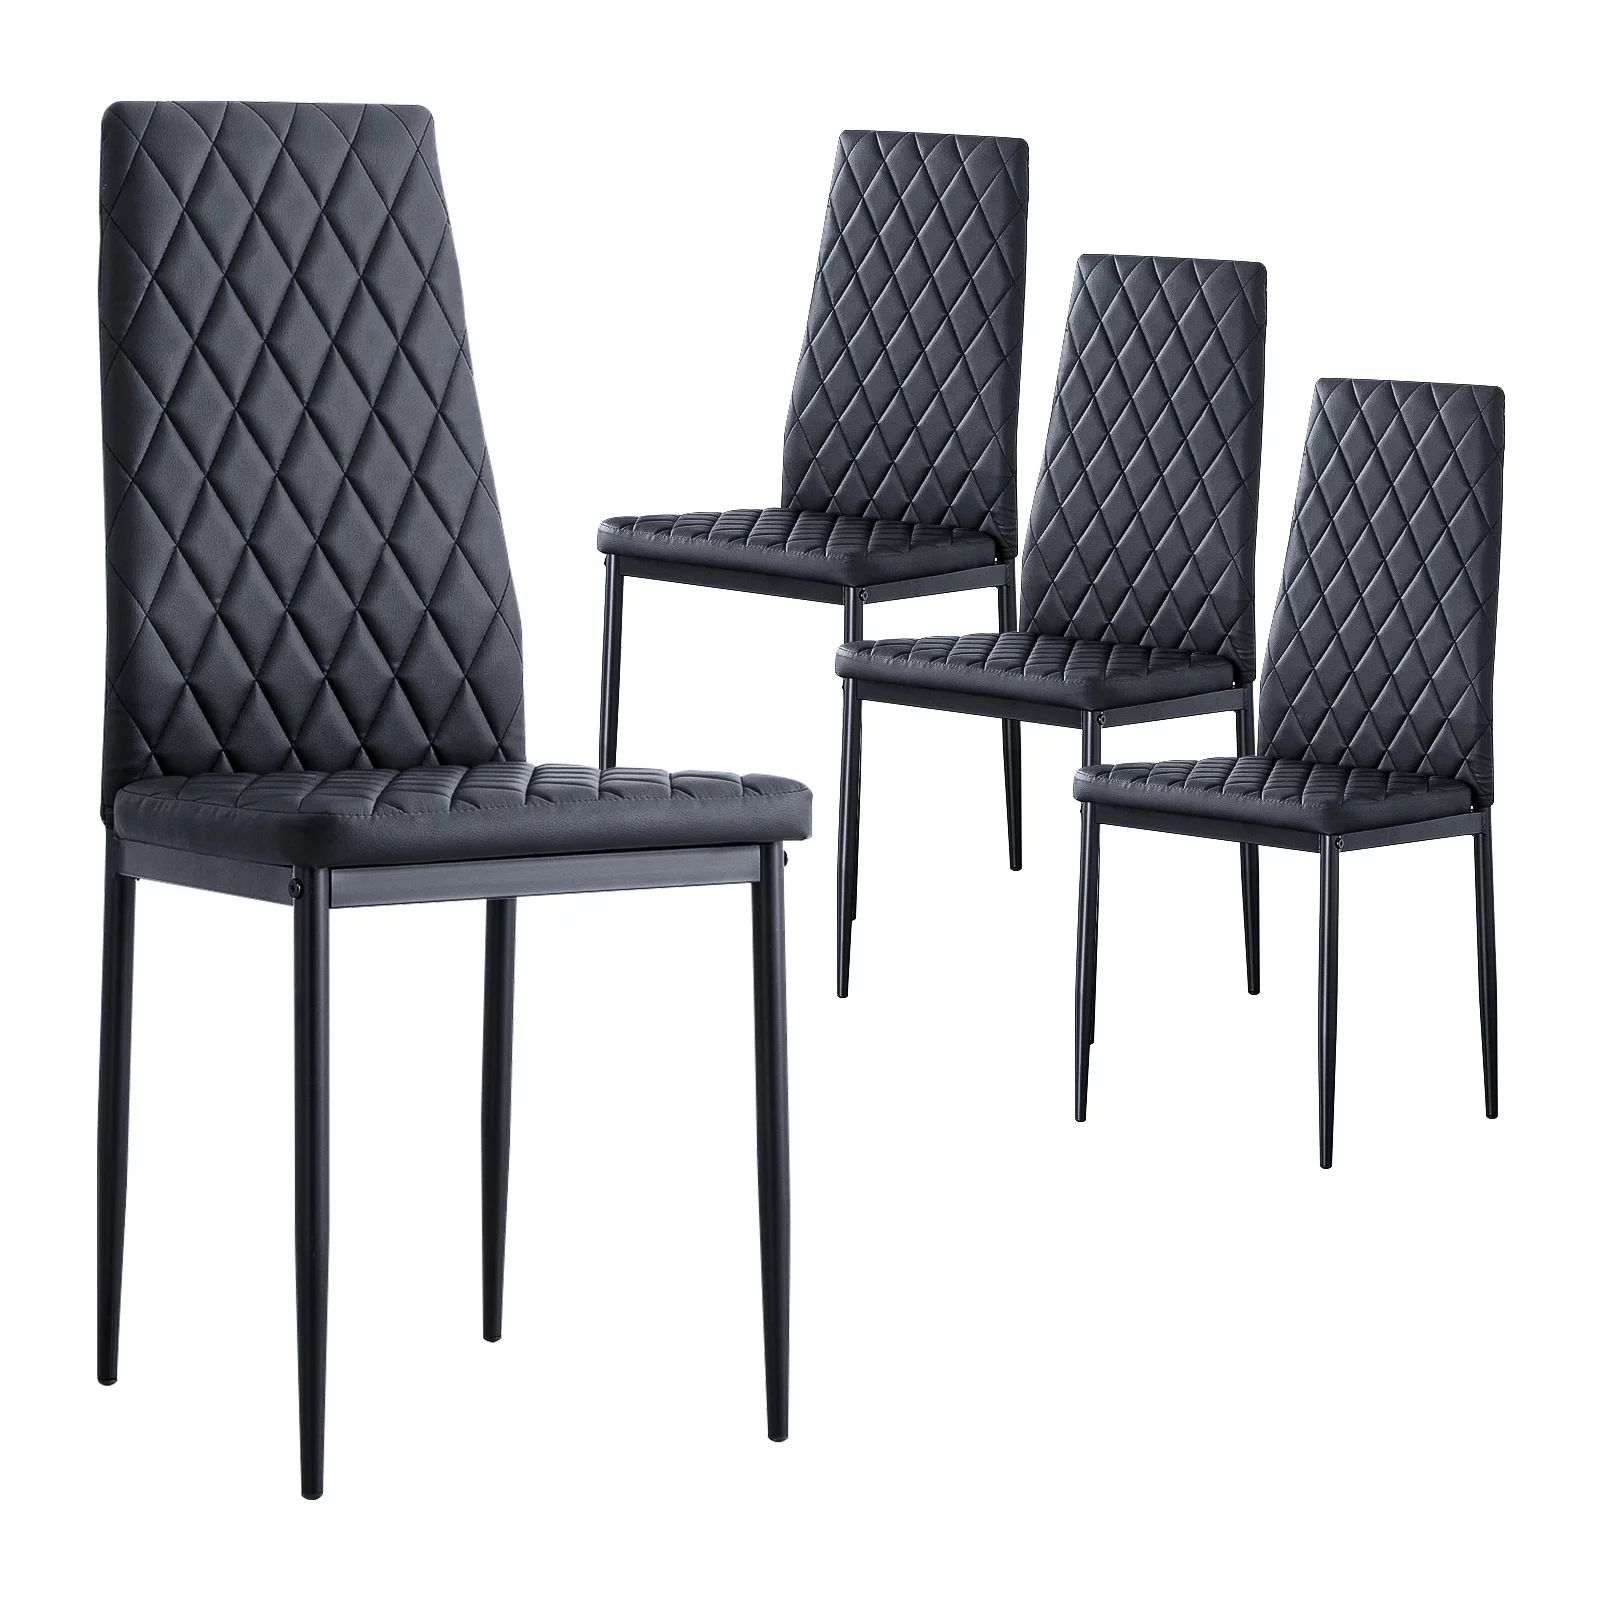 Resenkos Set of 4 Modern Leather Seat Dining Chairs, High Back Side Chairs with Metal Legs for Ki... | Walmart (US)